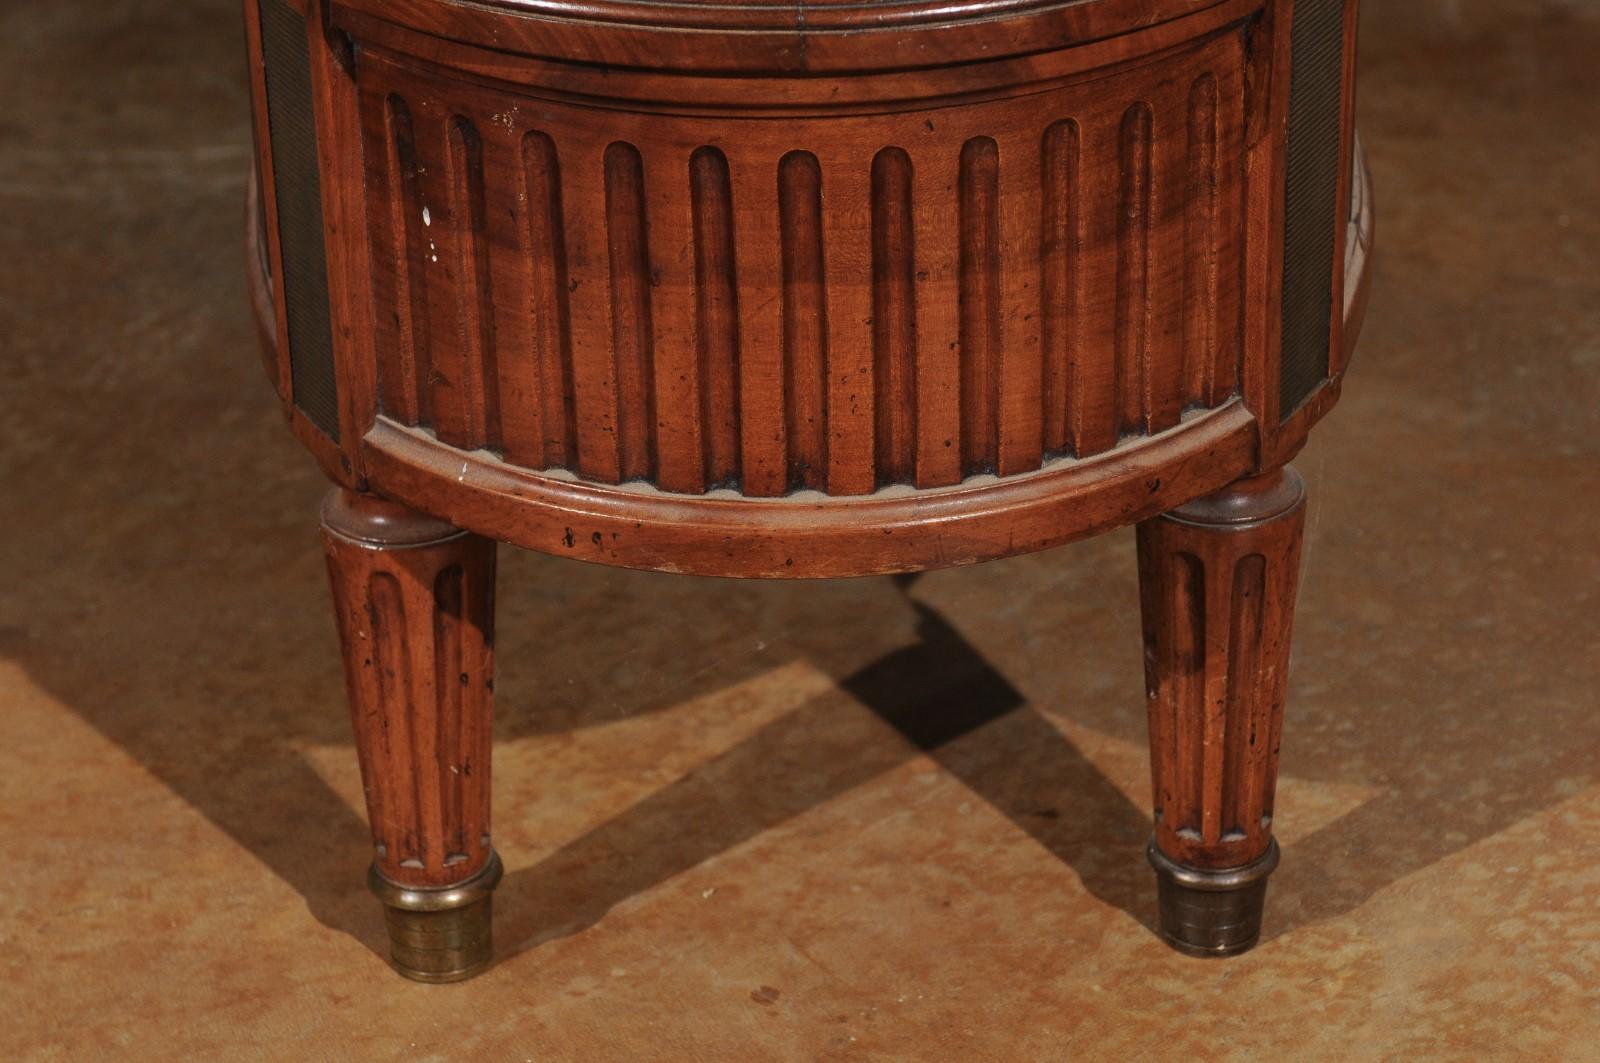 French 19th Century Neoclassical Style Cherry Jardinière with Tin-Lined Interior For Sale 6